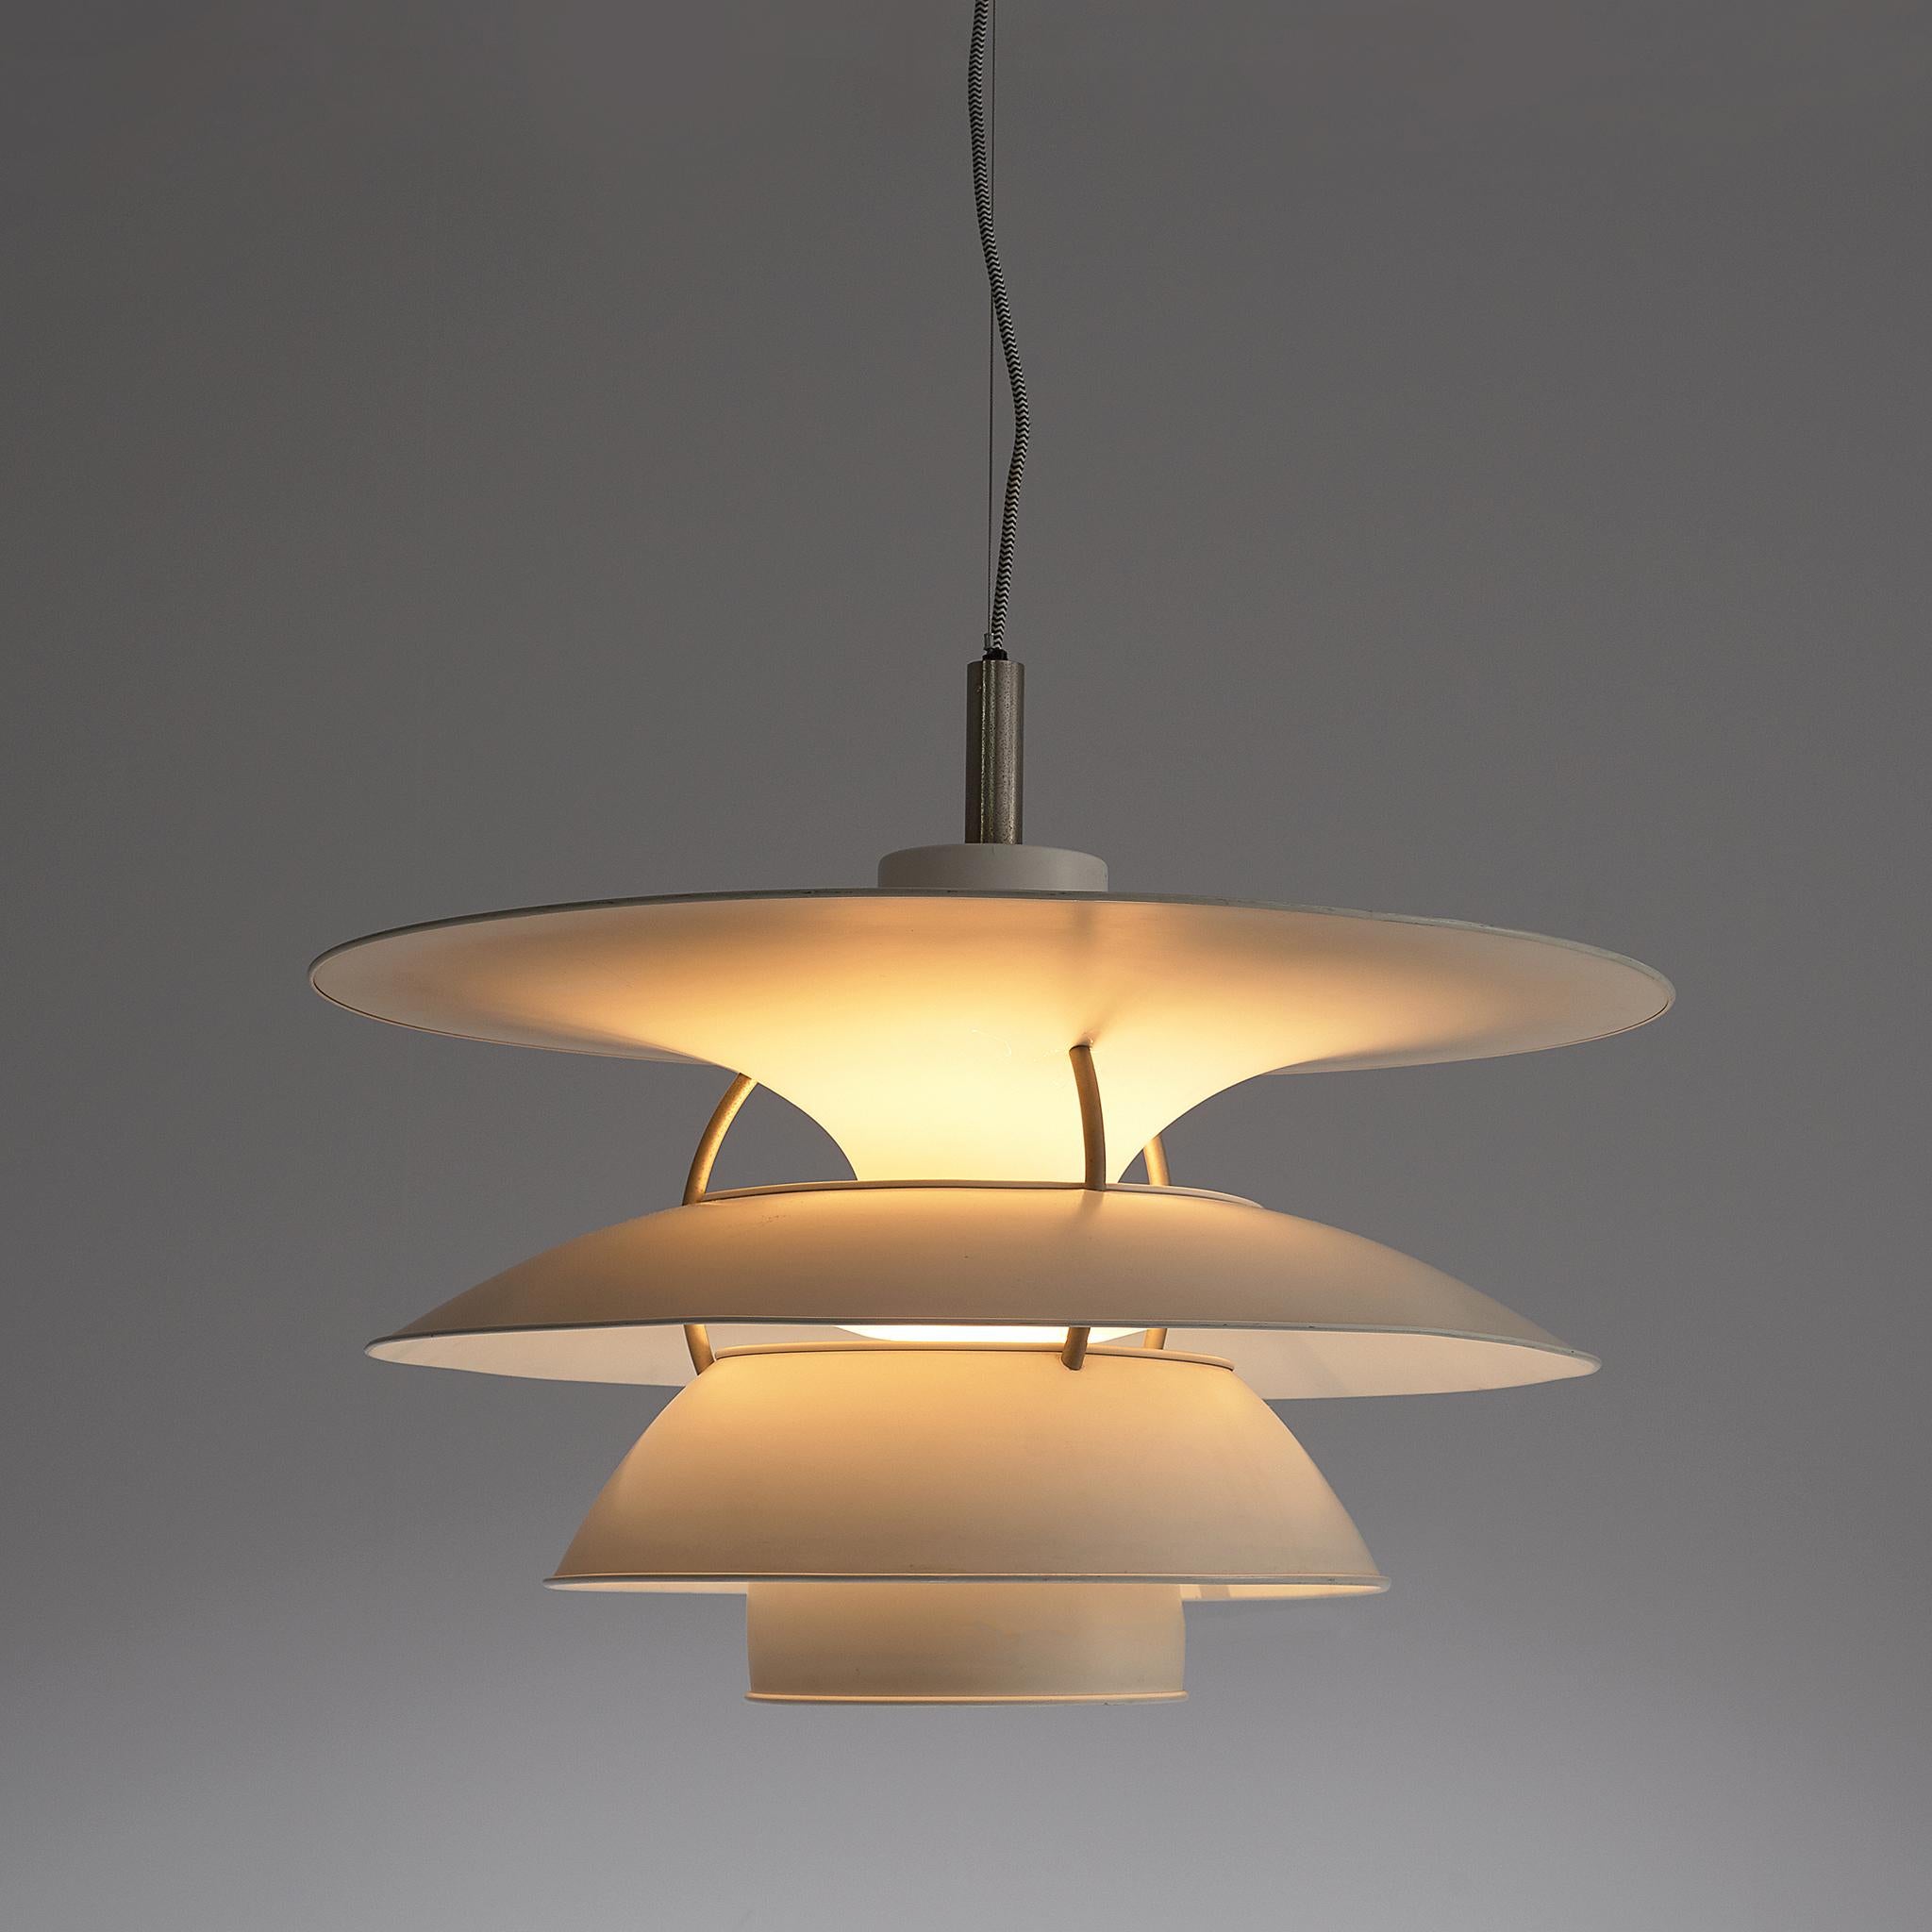 Charlottenburg' pendant, in metal, by Poul Henningsen for Louis Poulsen, Denmark, 1979.

White metal shades mounted on three steel ribs. The shades are designed for horizontal and vertical surfaces to indirectly illuminate a room. Provides a